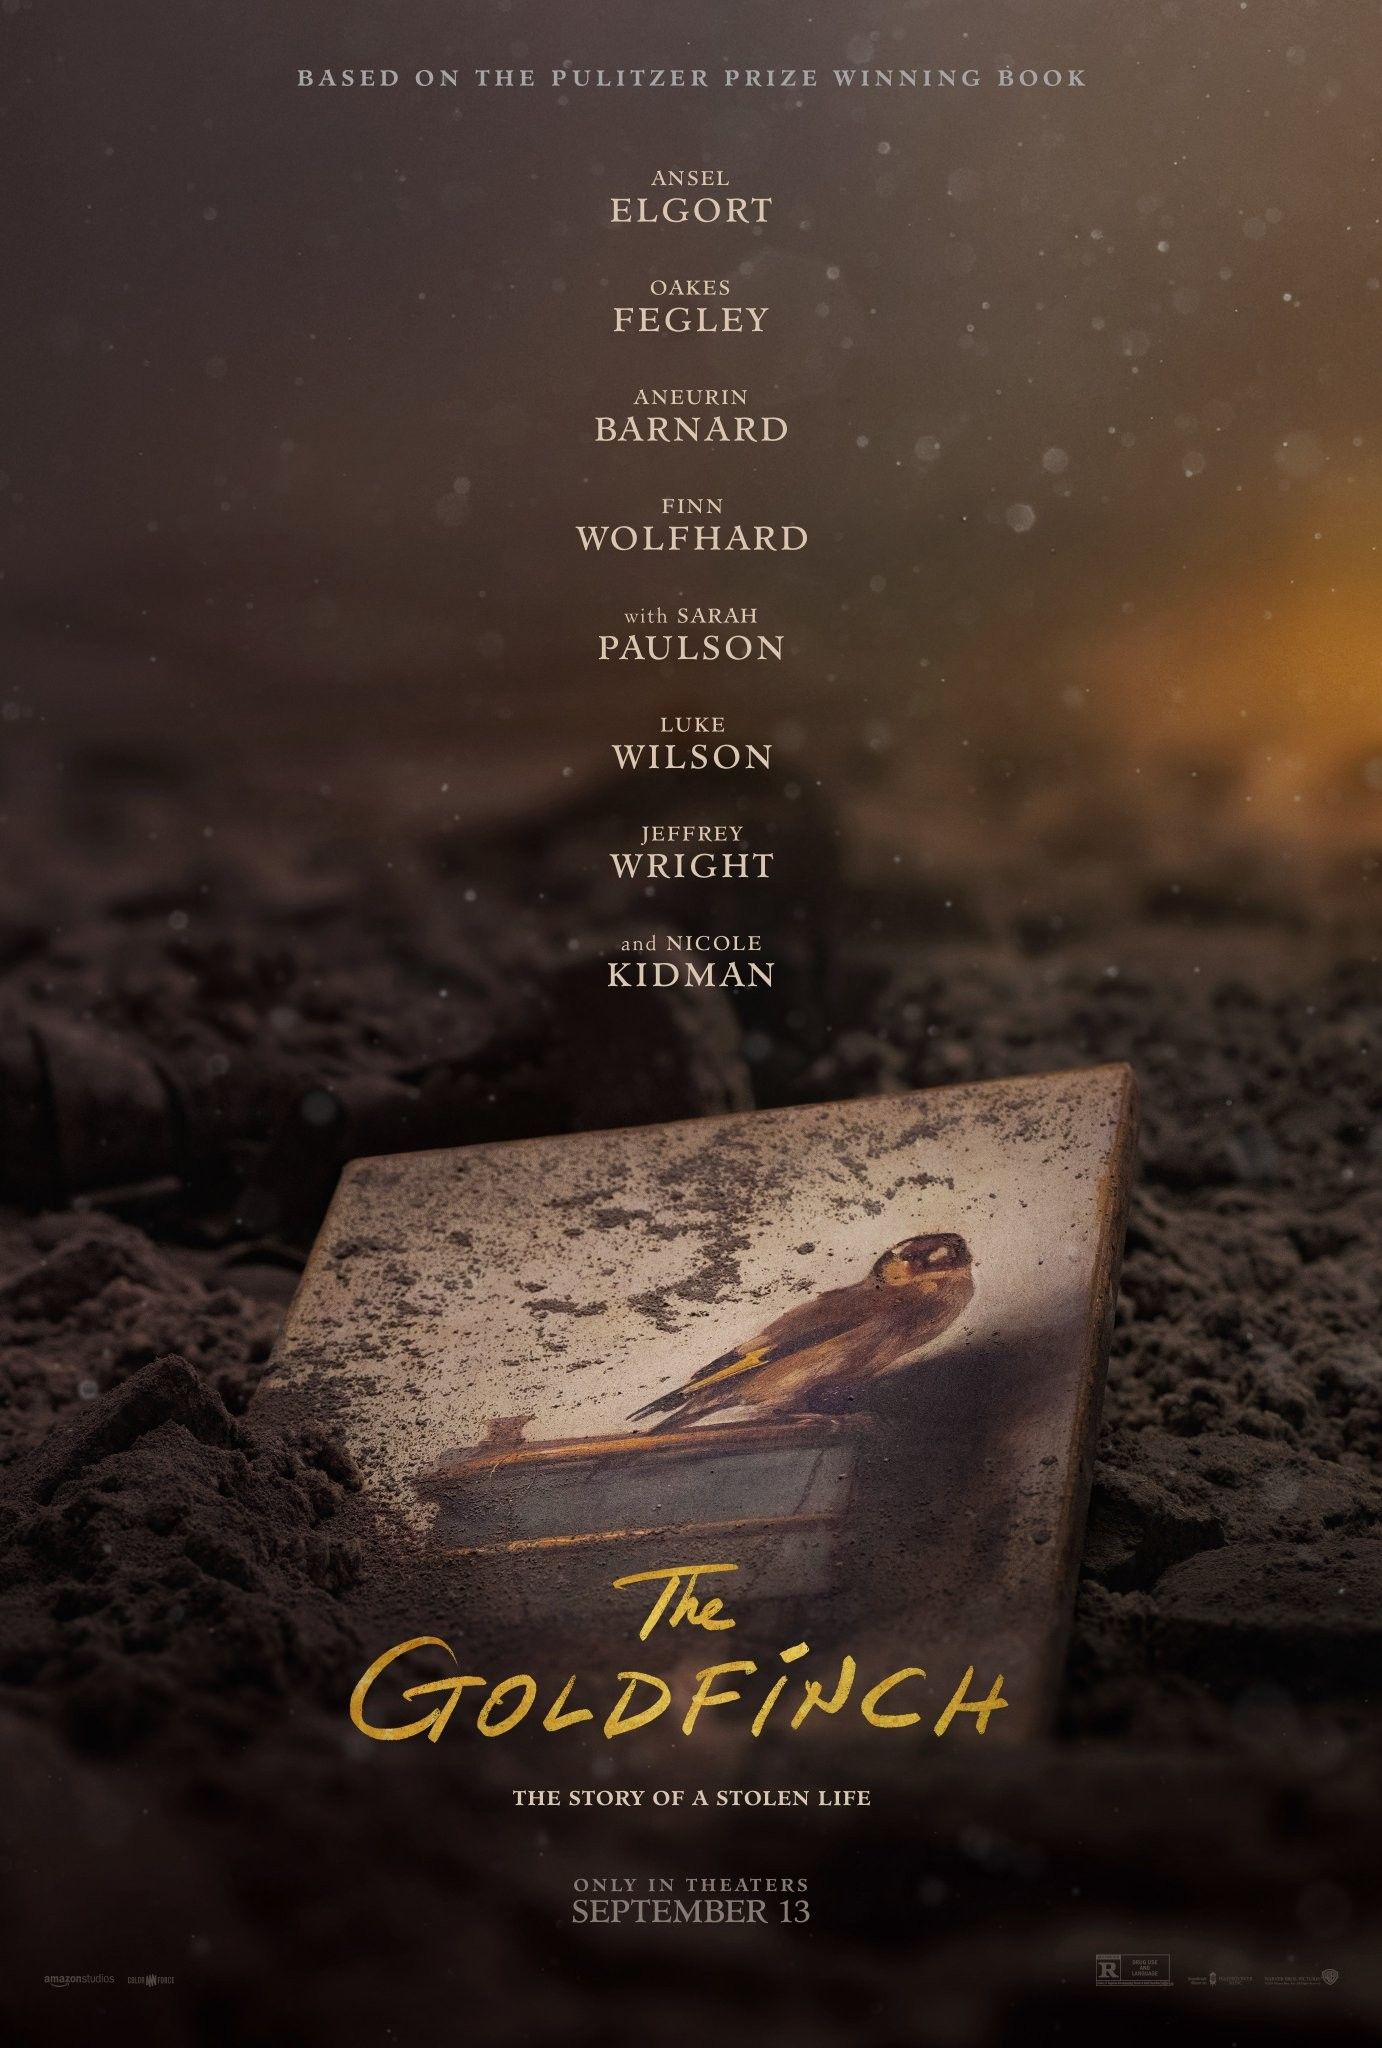 The Goldfinch 2019 movie poster